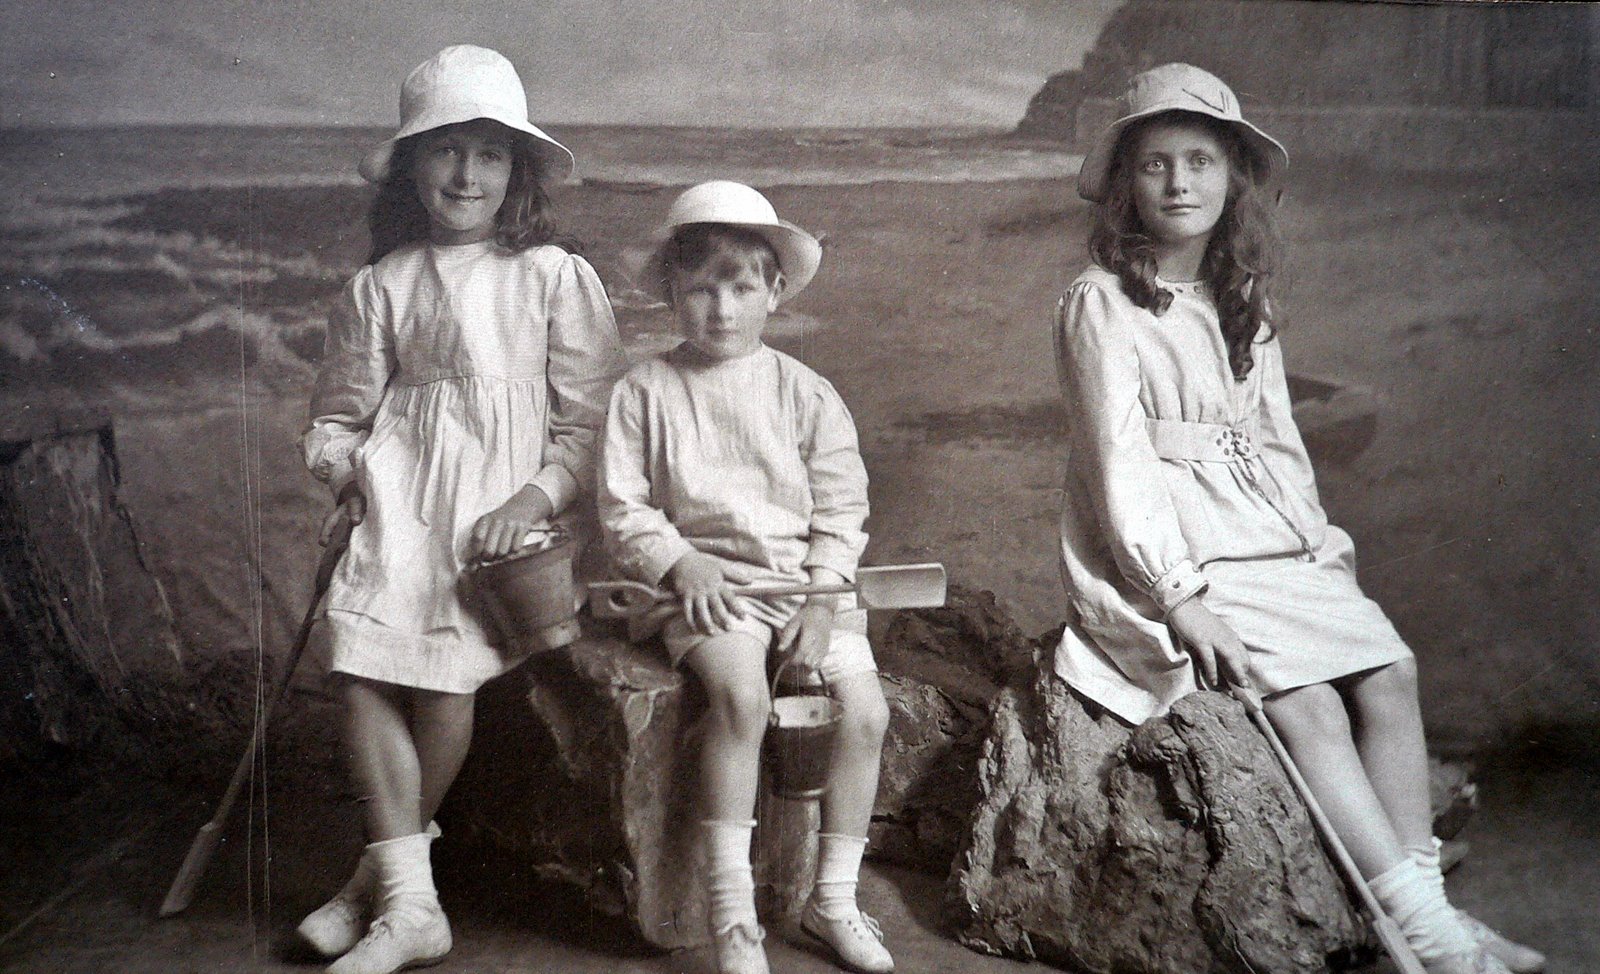 [Ruth+and+Annette+as+children.jpg]